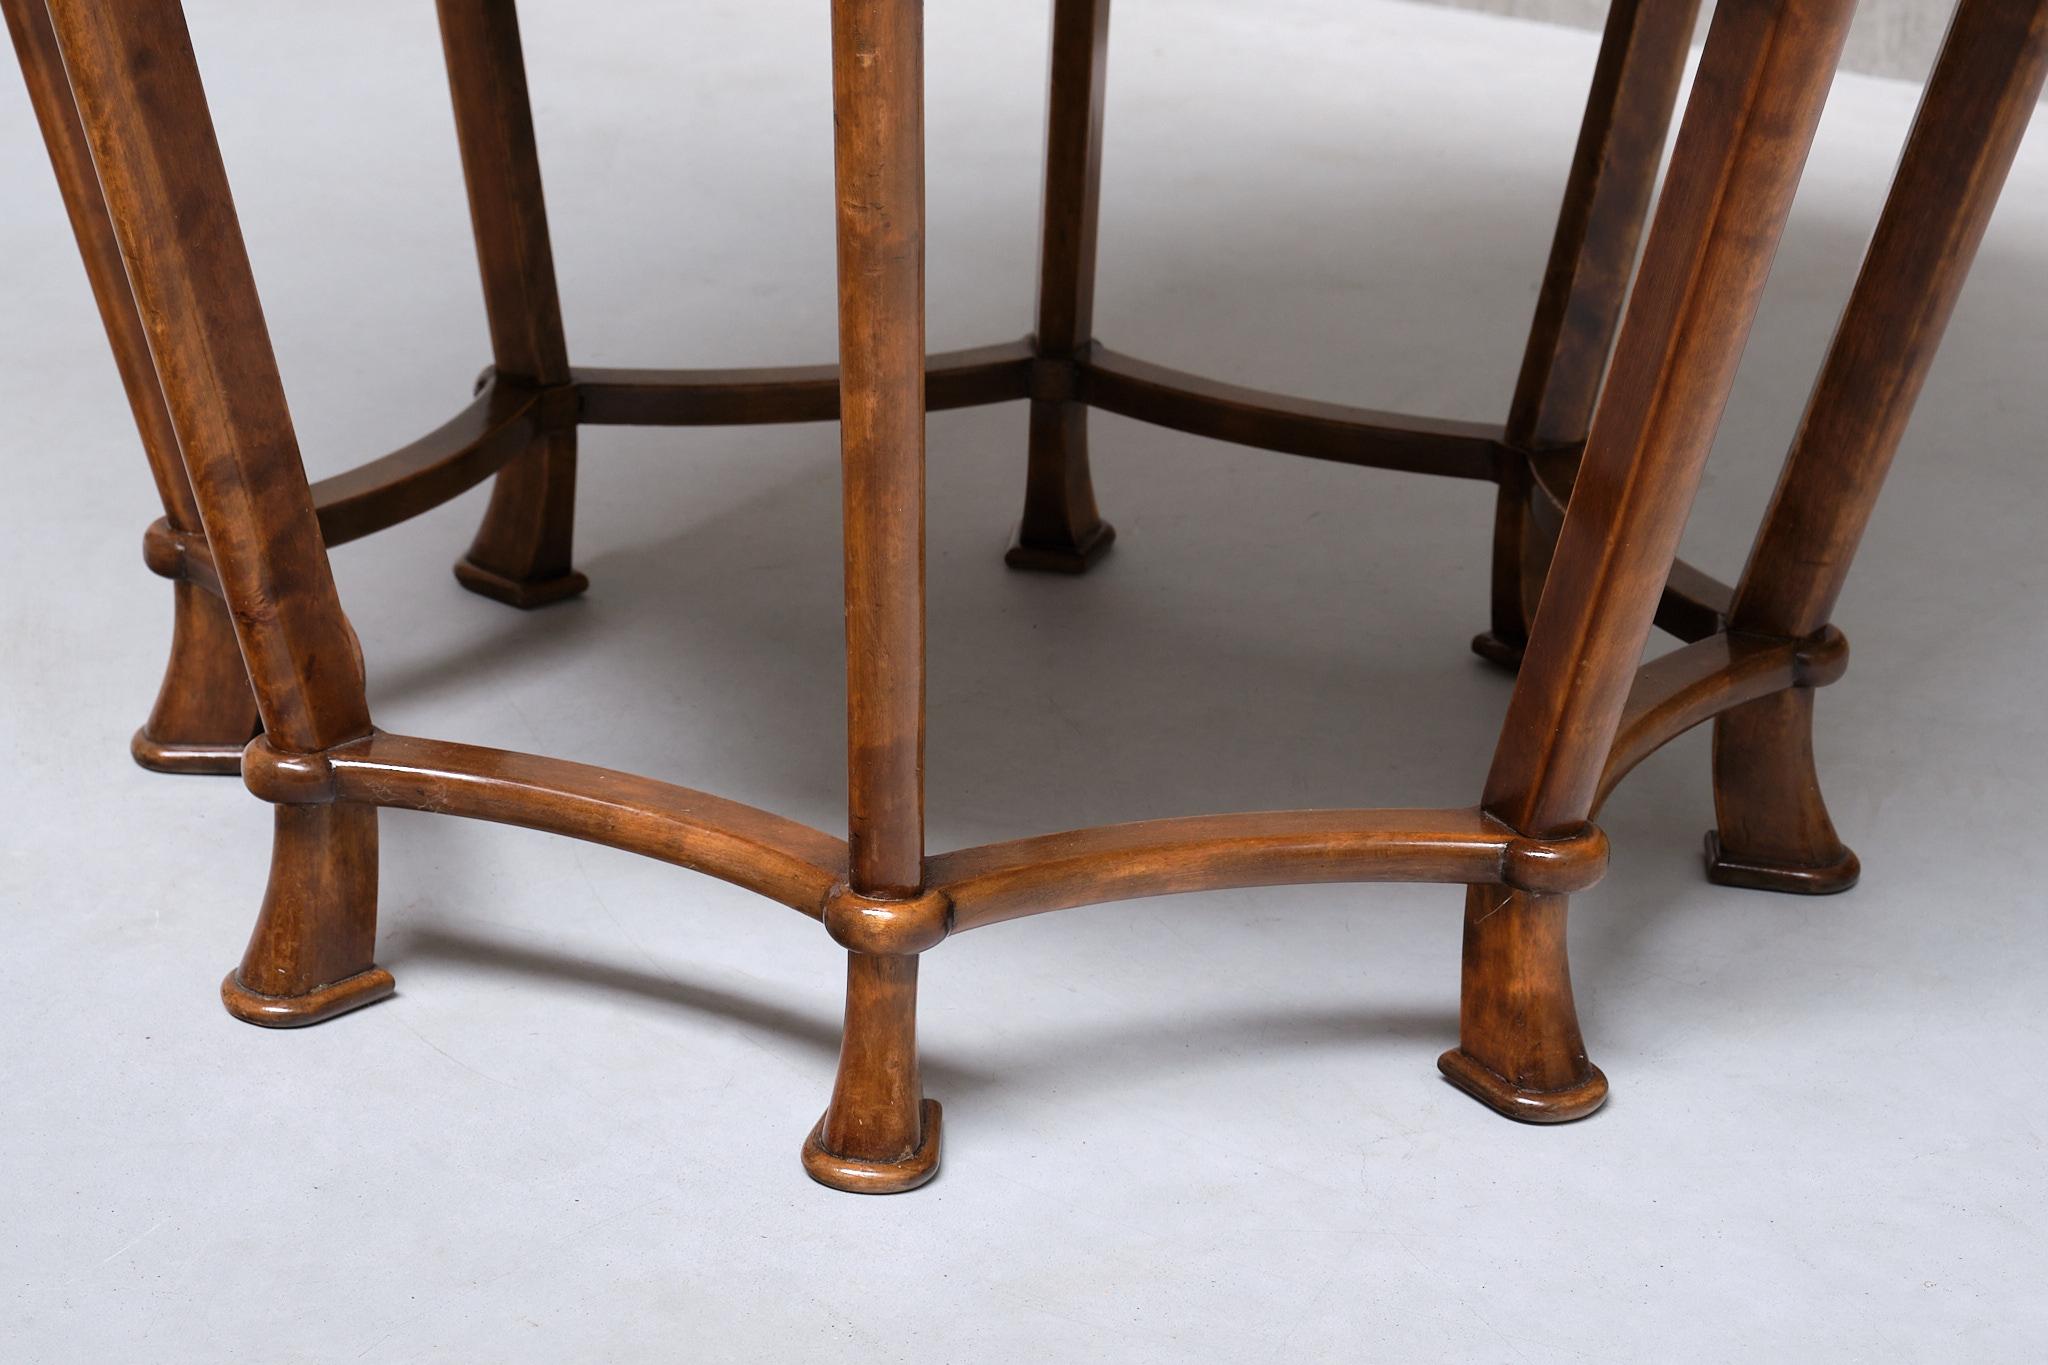 Exceptional Expressionist Octagonal Center Table in Flamed Birch, Germany, 1920s For Sale 5